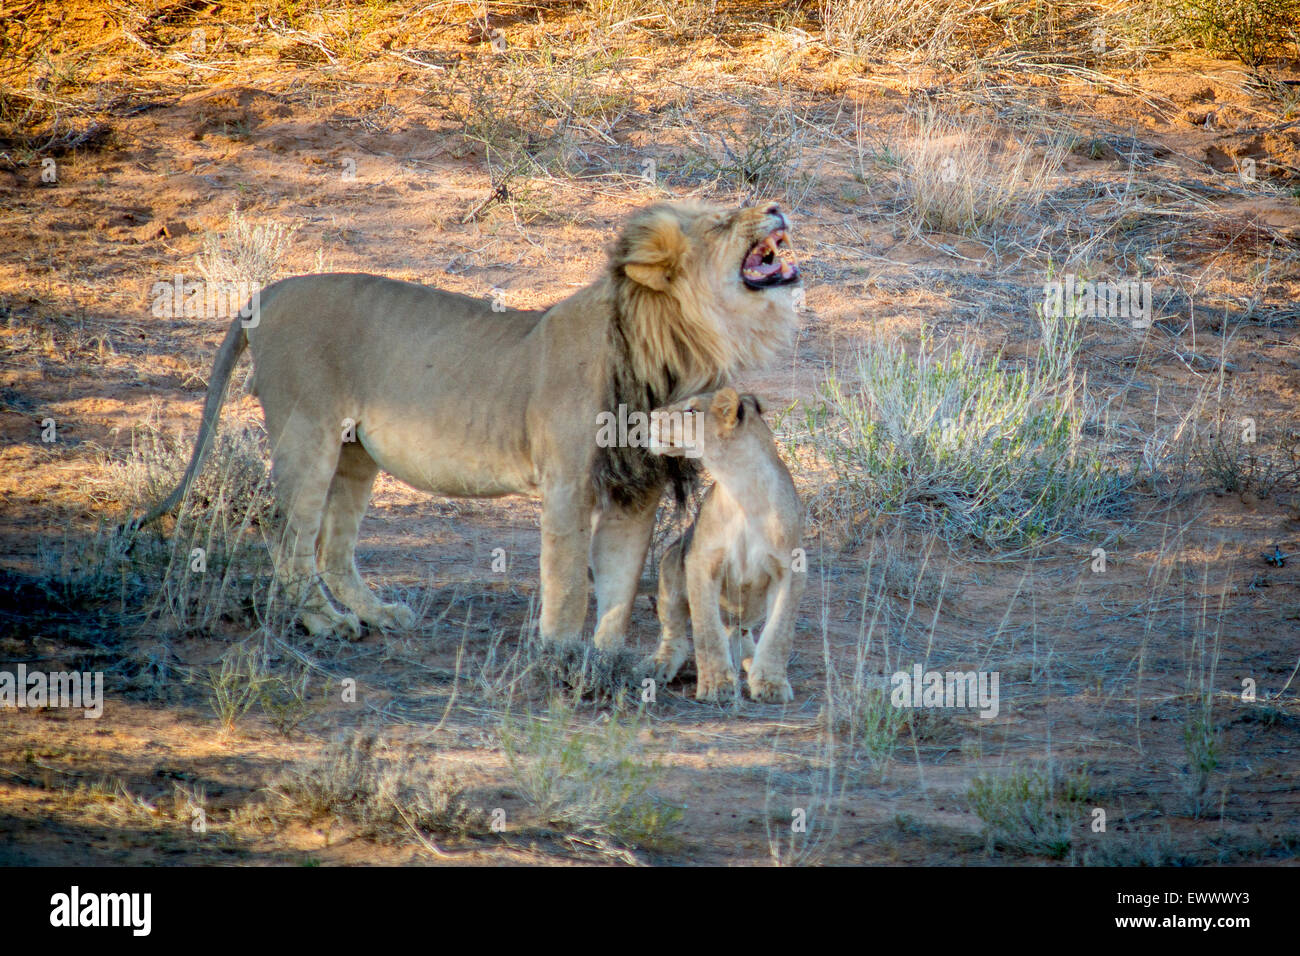 Kgalagadi Transfrontier Park, South Africa - Male lion (Panthera leo)and cub Stock Photo